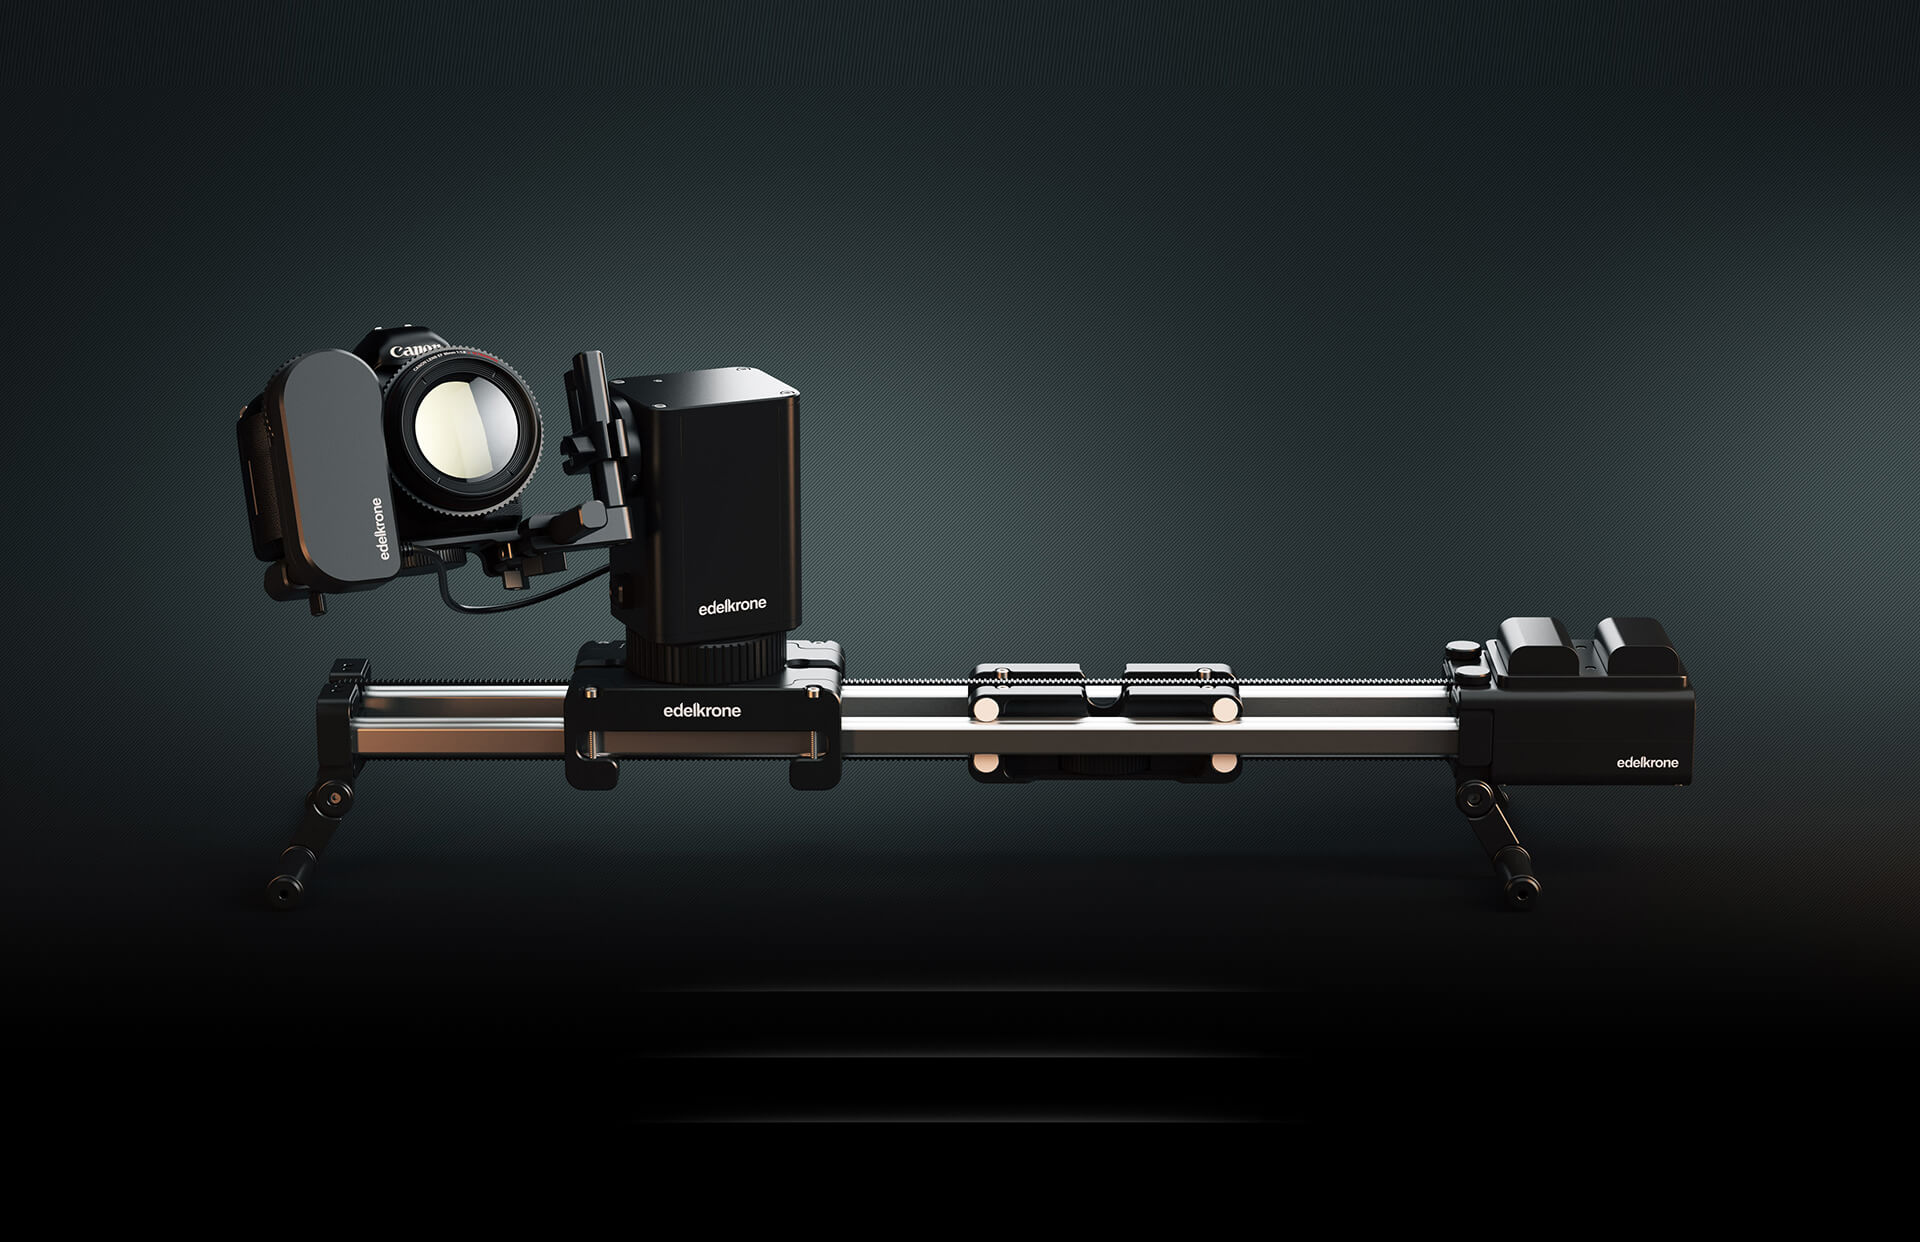 Edelkrone launches SliderPLUS X and Motion Kit 4-axis motion control system